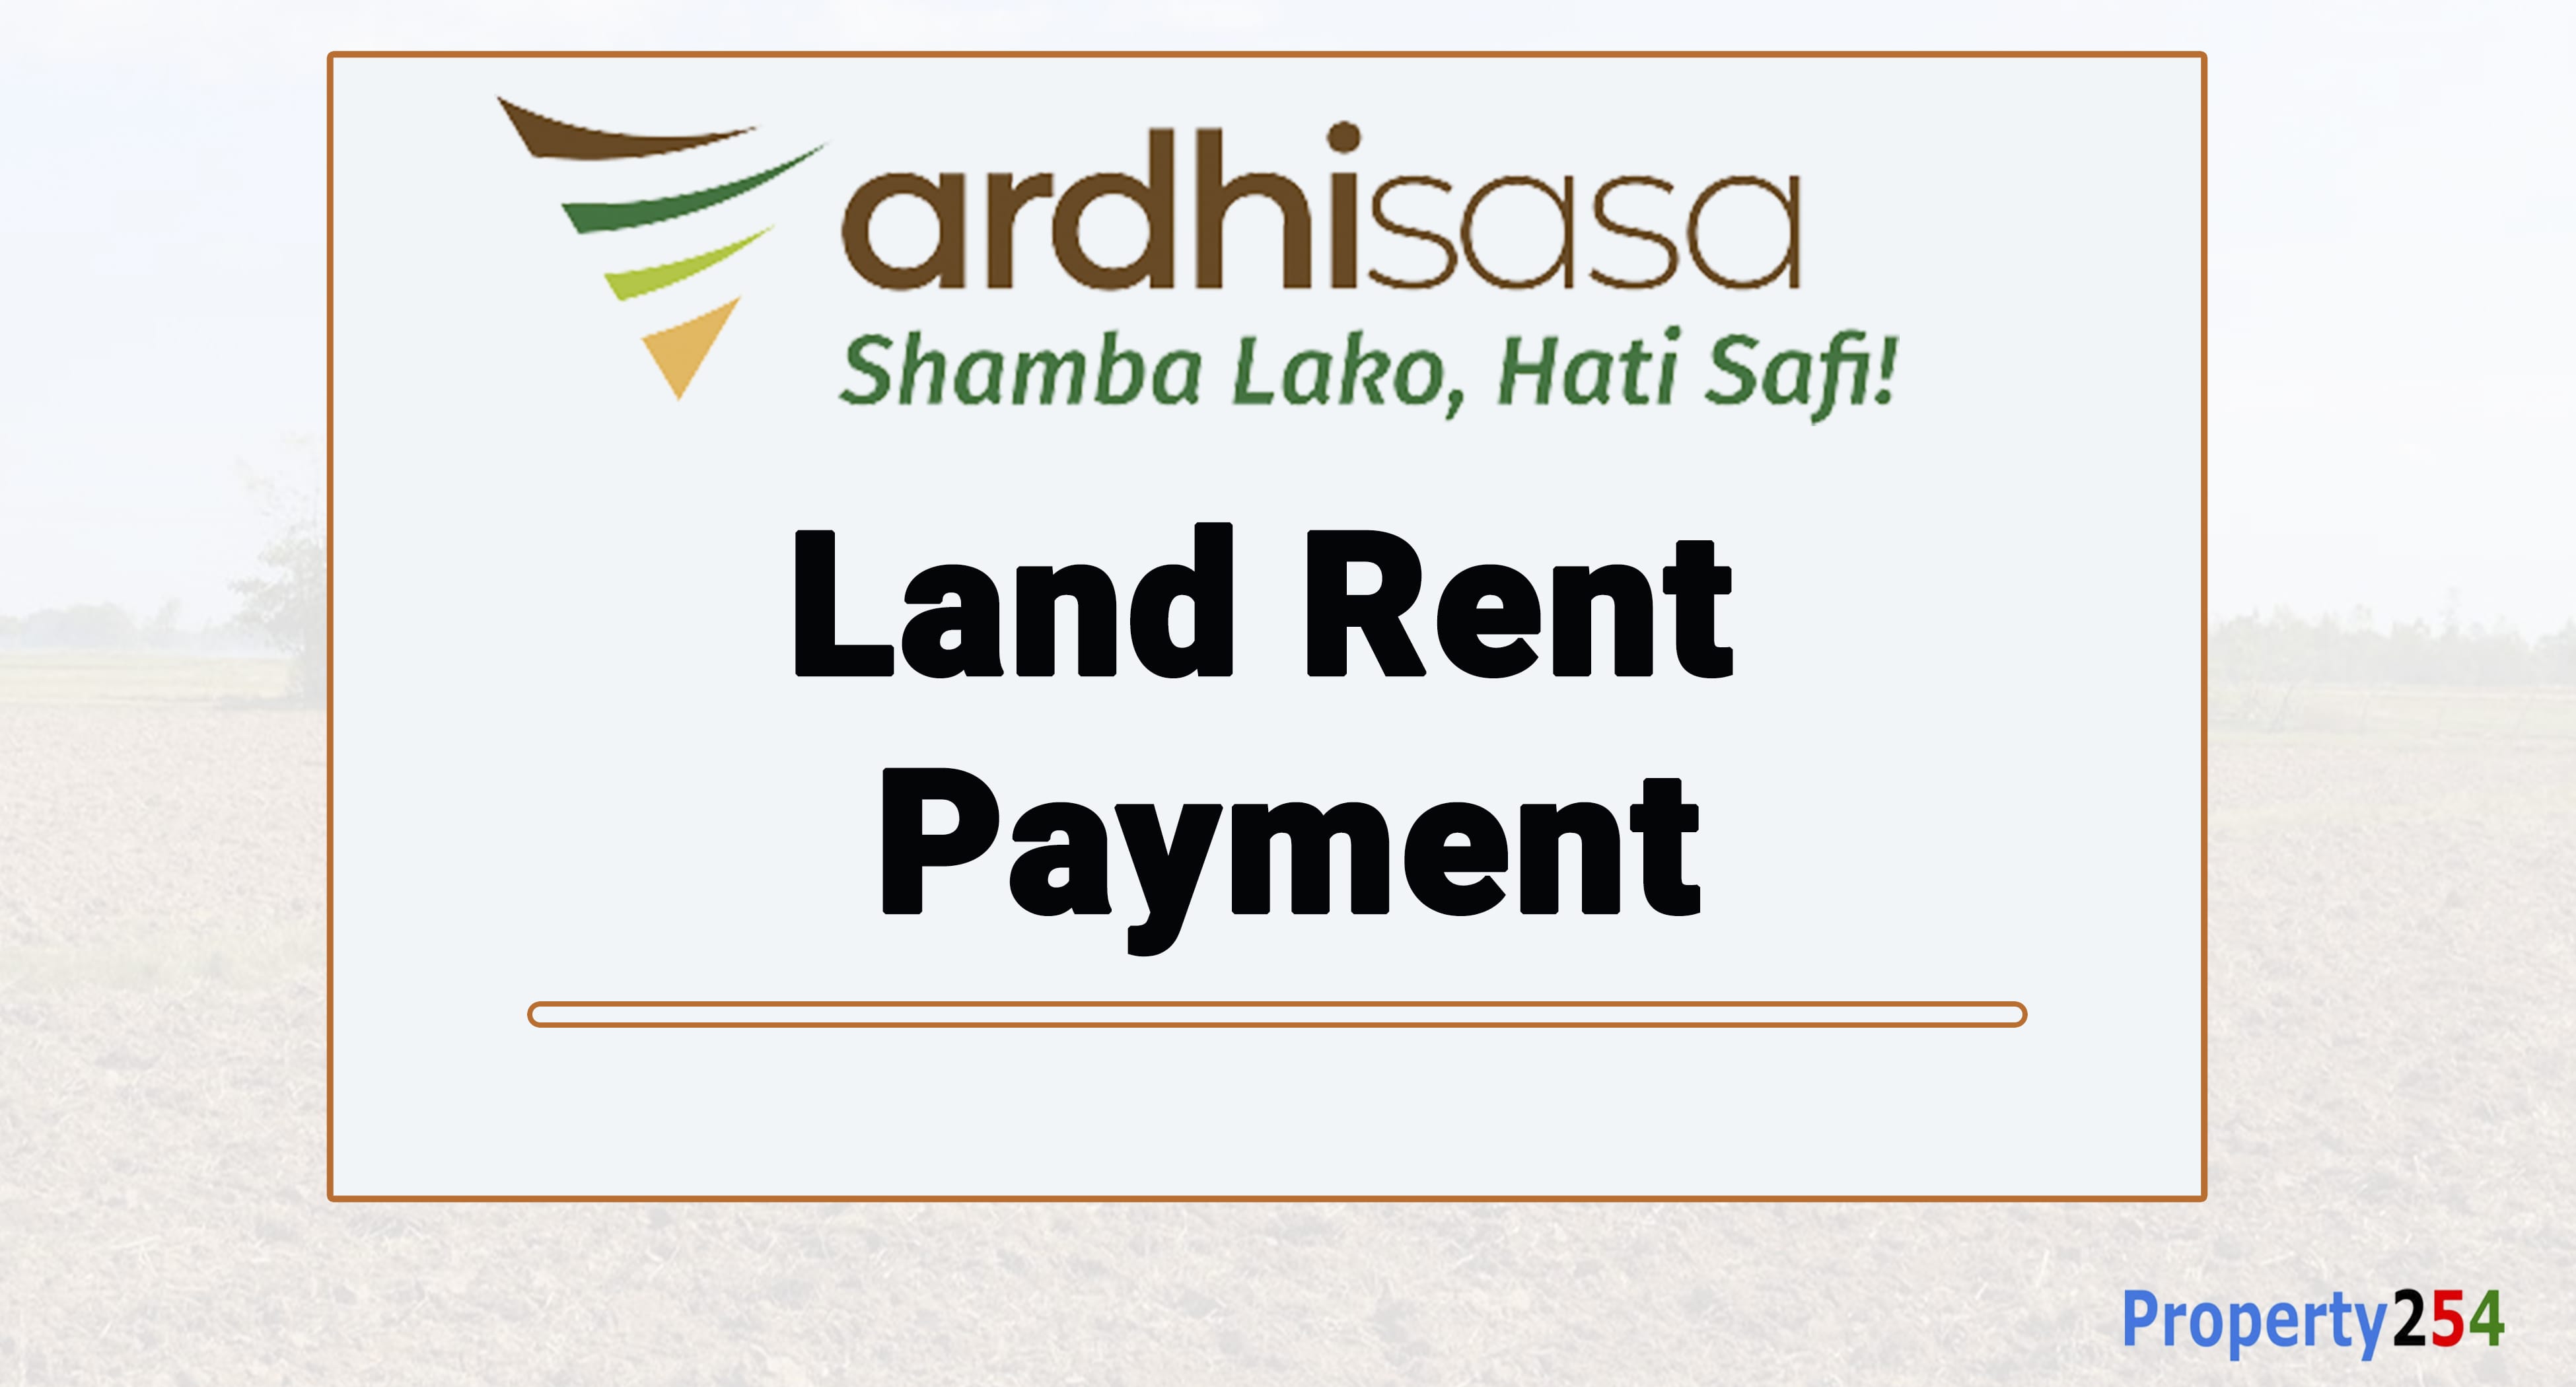 How to Pay Land Rent on Ardhisasa thumbnail